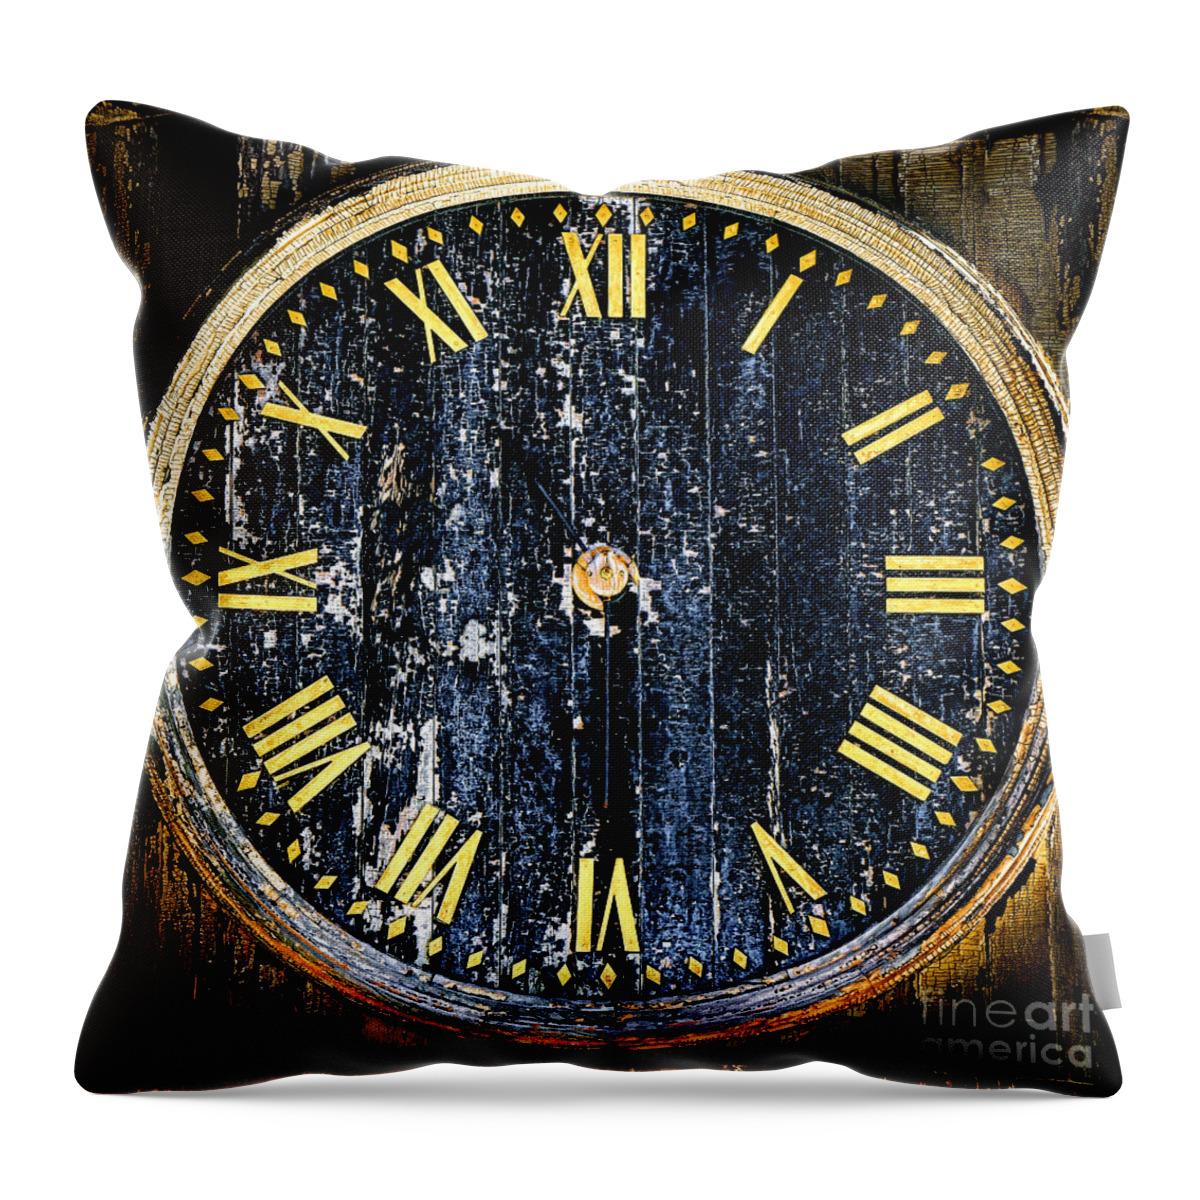 Antique Throw Pillow featuring the photograph Antique Bell Tower Clock by Olivier Le Queinec